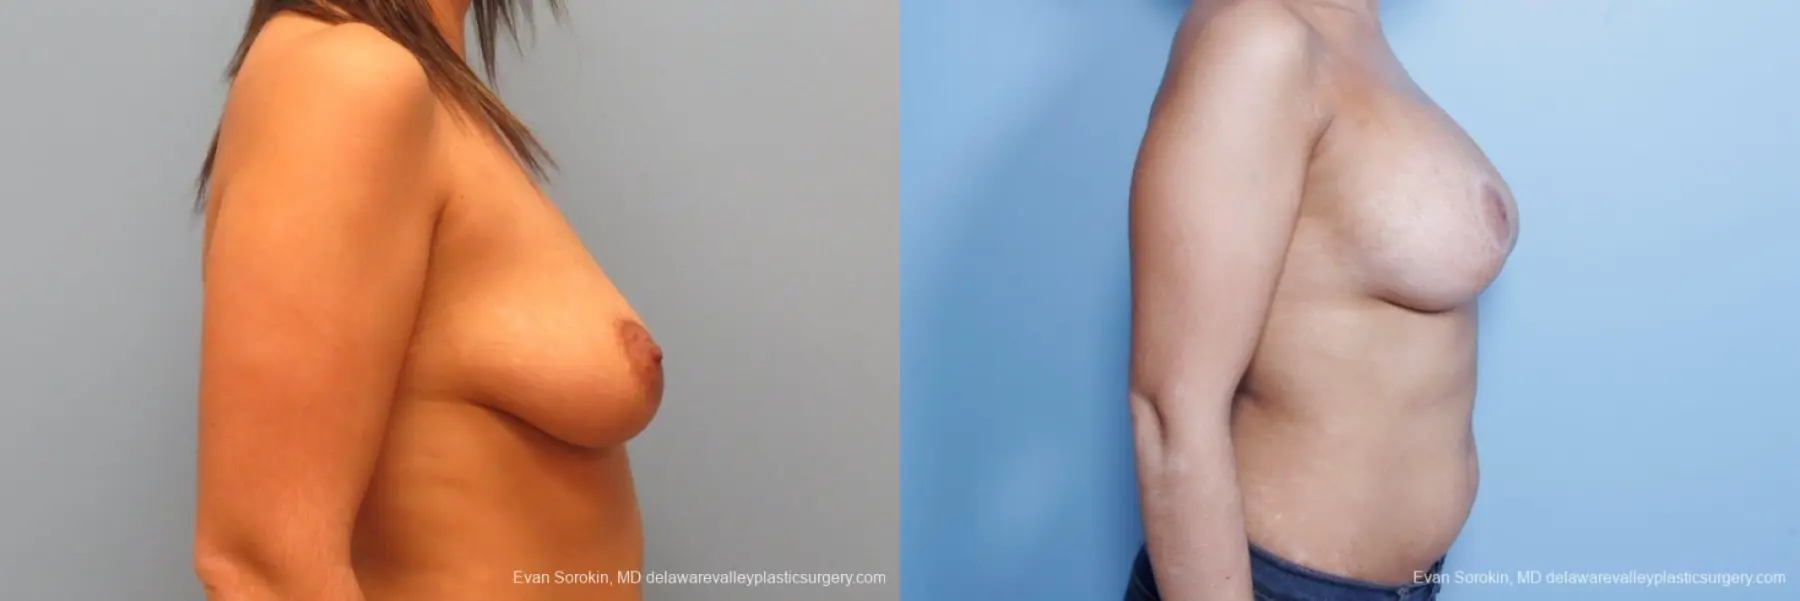 Philadelphia Breast Lift and Augmentation 8688 - Before and After 4